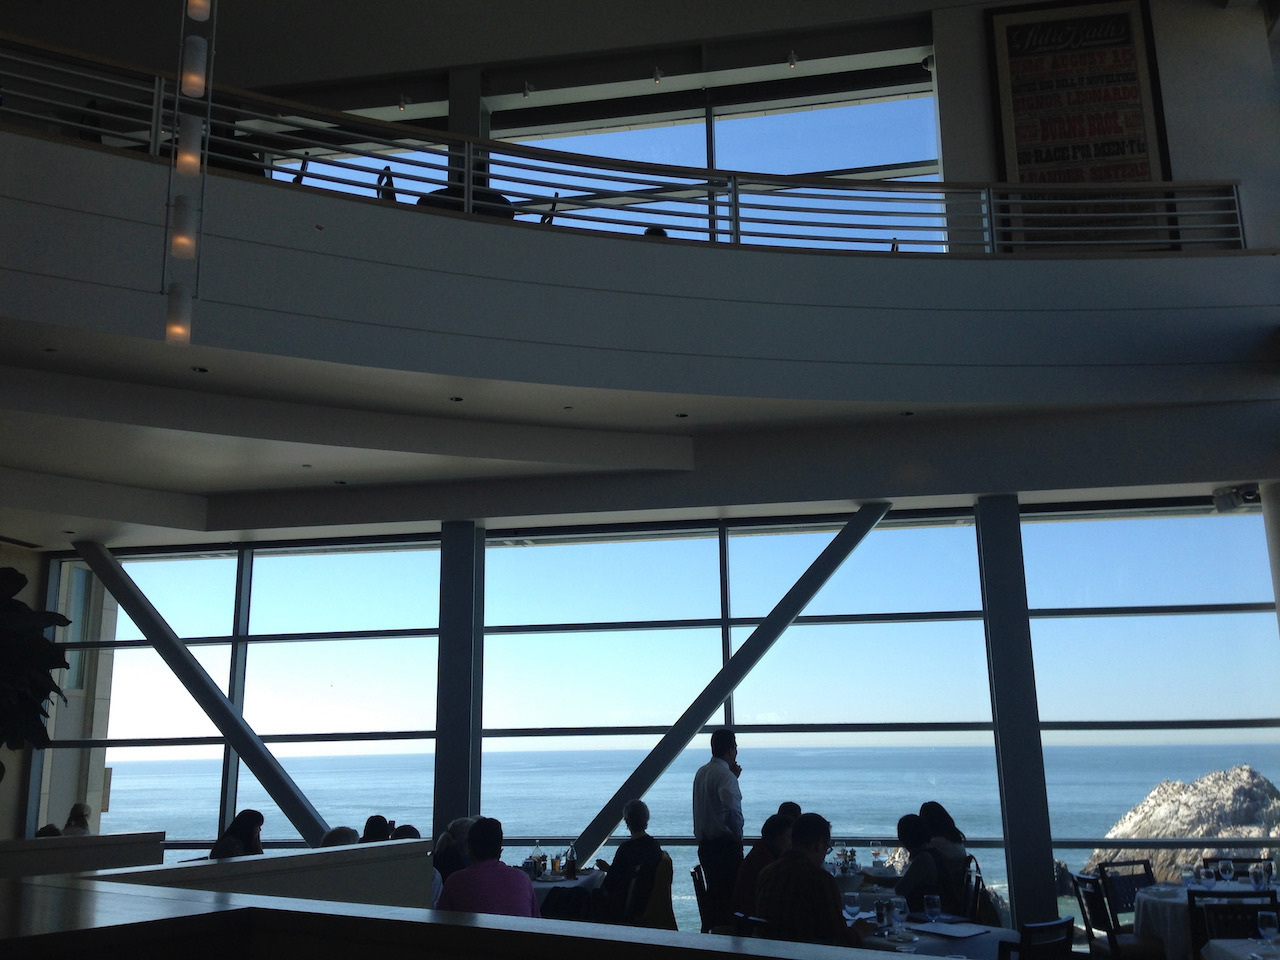 Sutro's, the fancier restaurant on the Cliff House's lower level. The balcony bar is visible at the top of the picture.